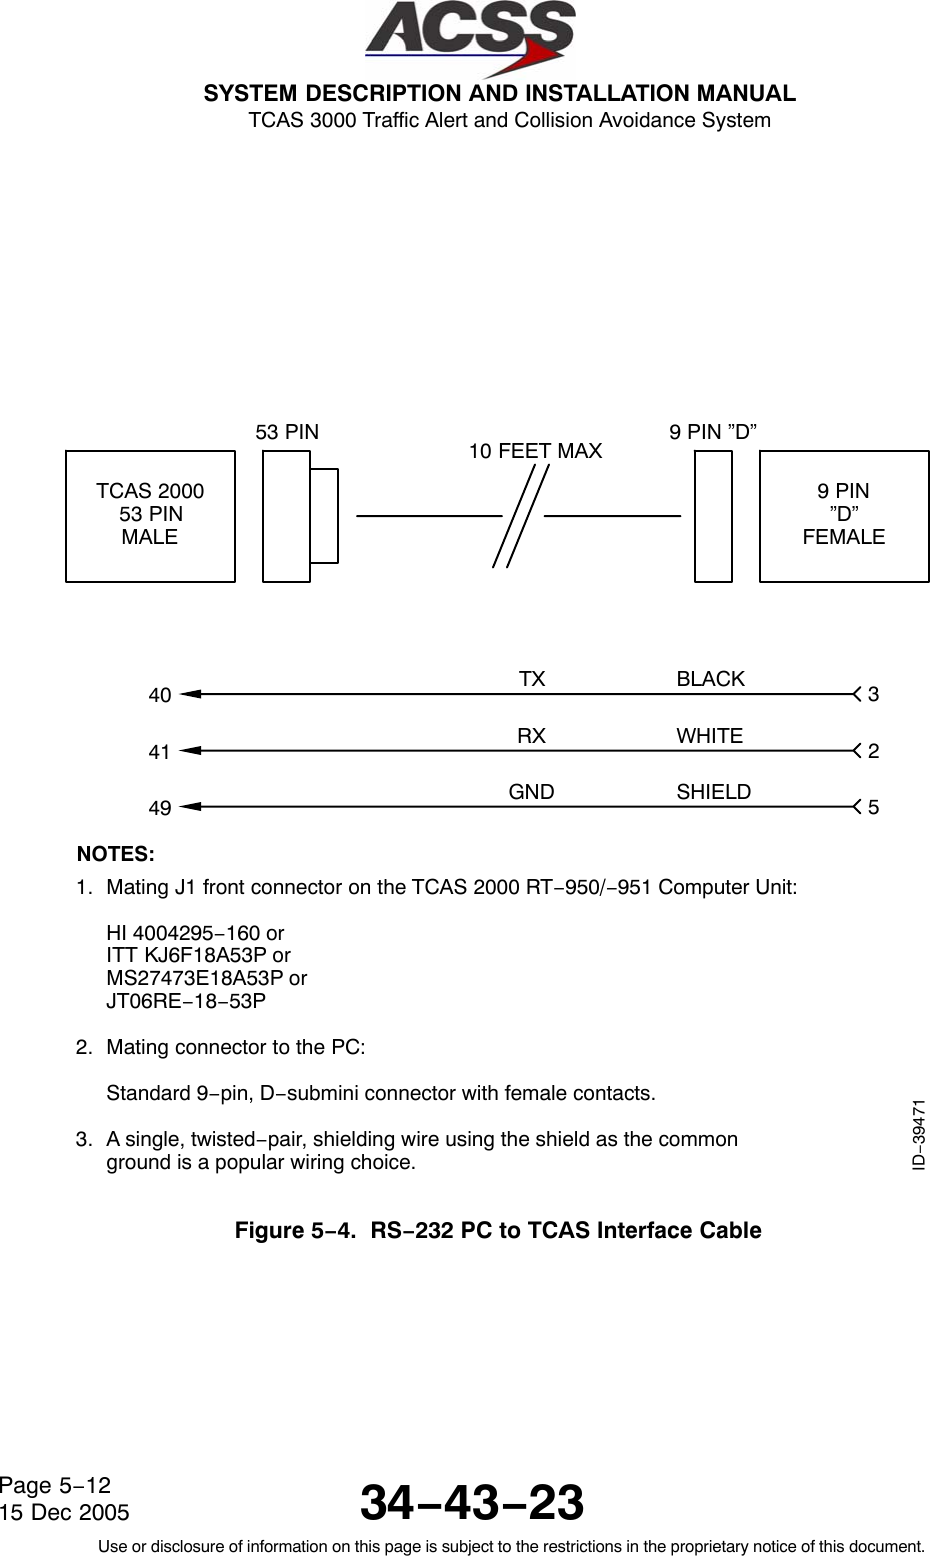  SYSTEM DESCRIPTION AND INSTALLATION MANUAL TCAS 3000 Traffic Alert and Collision Avoidance System34−43−23Use or disclosure of information on this page is subject to the restrictions in the proprietary notice of this document.Page 5−1215 Dec 200540ID−39471TX 3TCAS 200053 PINMALE9 PIN”D”FEMALE53 PIN 9 PIN ”D”10 FEET MAXBLACK41 RX 2WHITE49 GND 5SHIELDNOTES:Mating J1 front connector on the TCAS 2000 RT−950/−951 Computer Unit:HI 4004295−160 orITT KJ6F18A53P orMS27473E18A53P orJT06RE−18−53PMating connector to the PC:Standard 9−pin, D−submini connector with female contacts.A single, twisted−pair, shielding wire using the shield as the commonground is a popular wiring choice.1.2.3.Figure 5−4.  RS−232 PC to TCAS Interface Cable